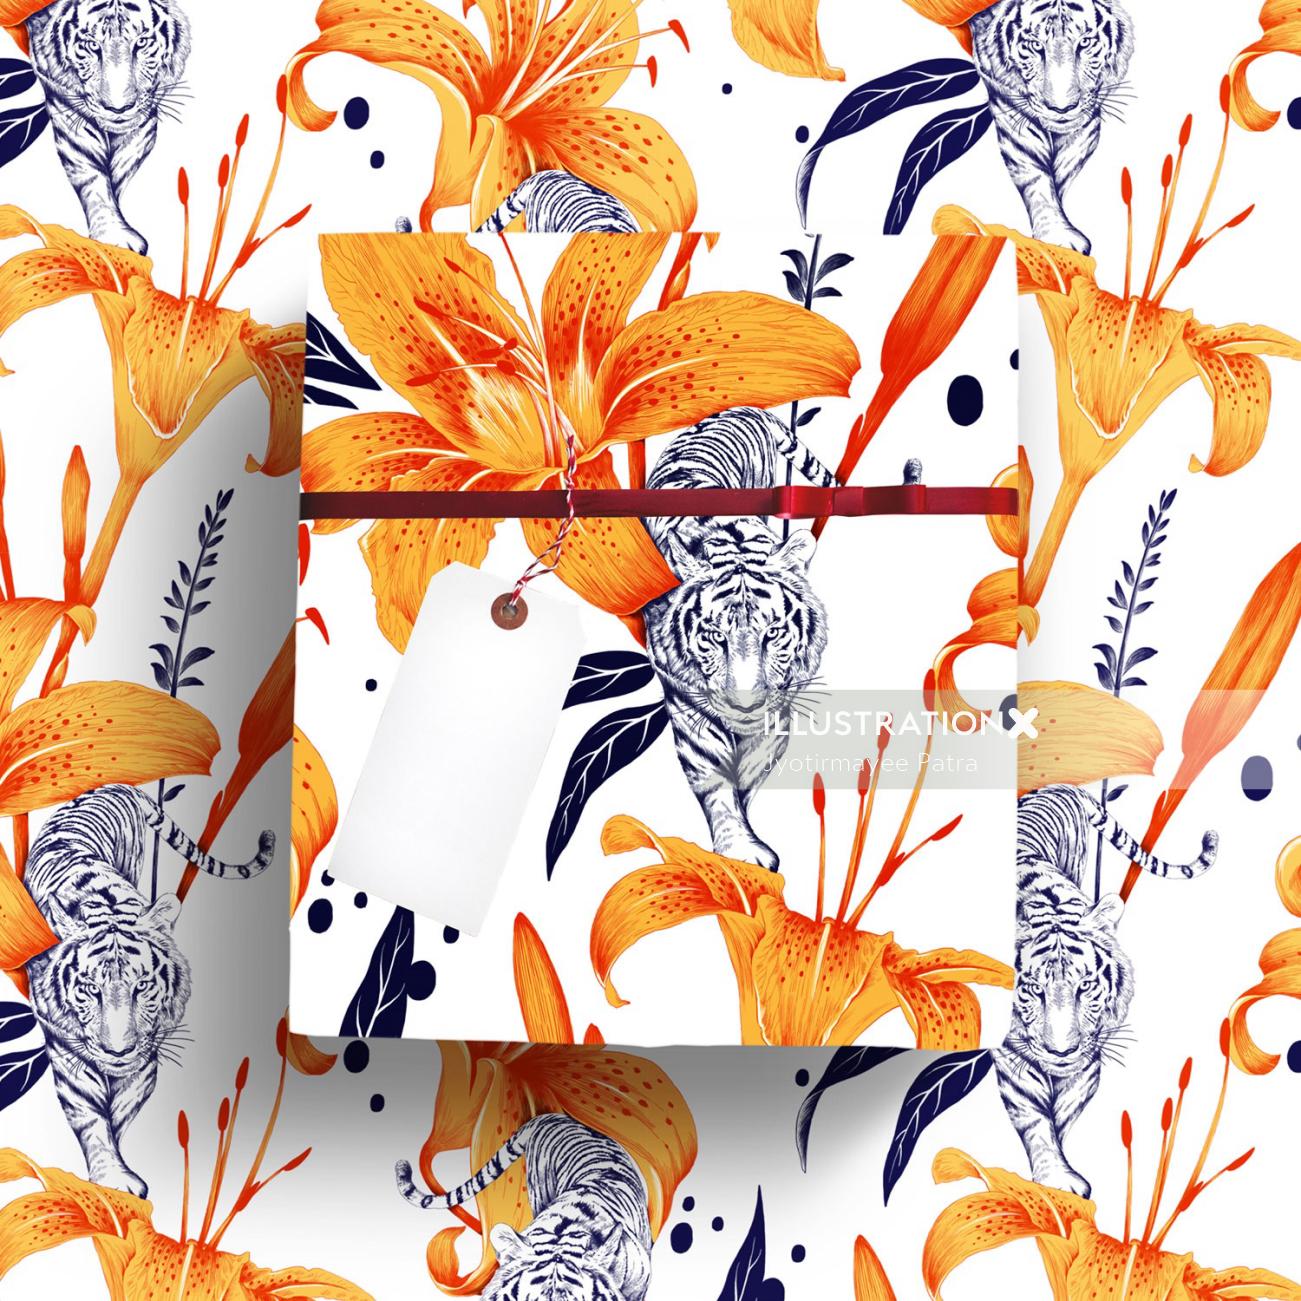 Floral illustration with tigerly pattern